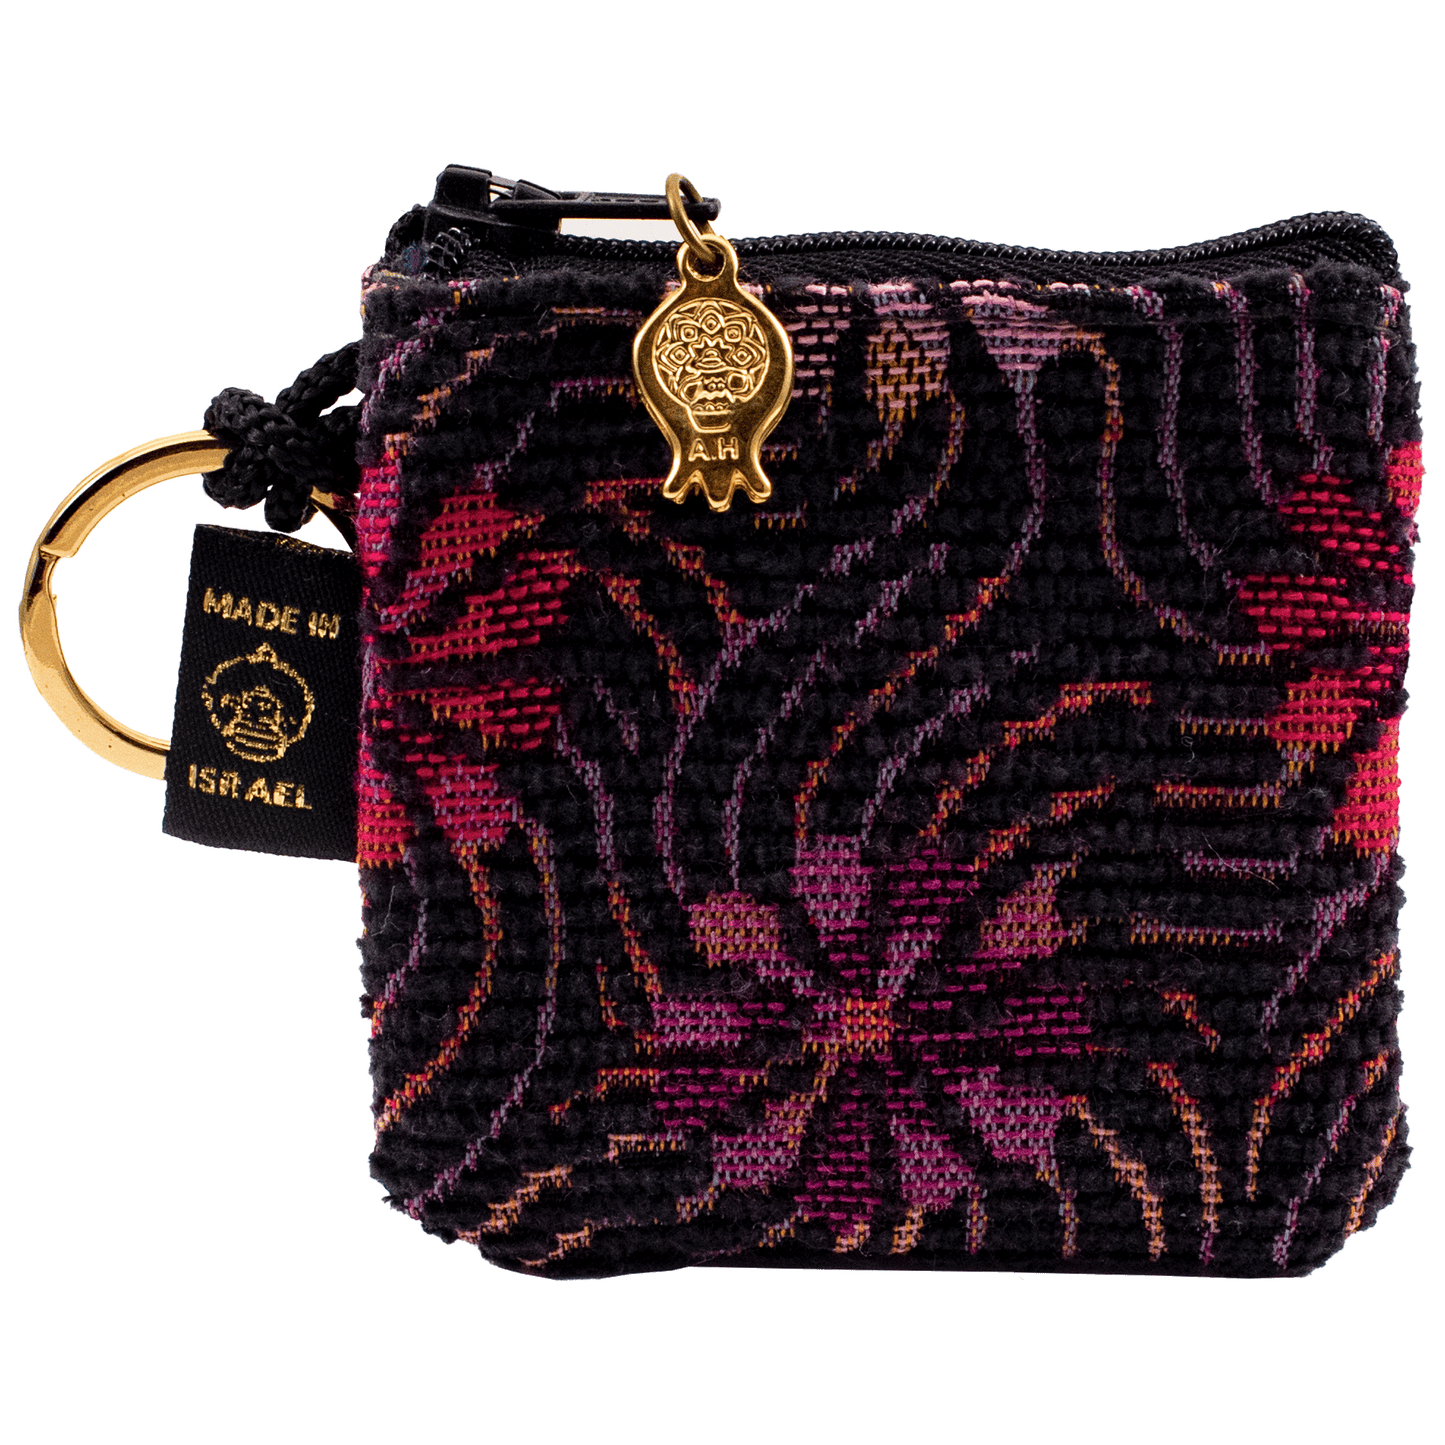 Black Keychain Change Purse with whimsical colorful floral design